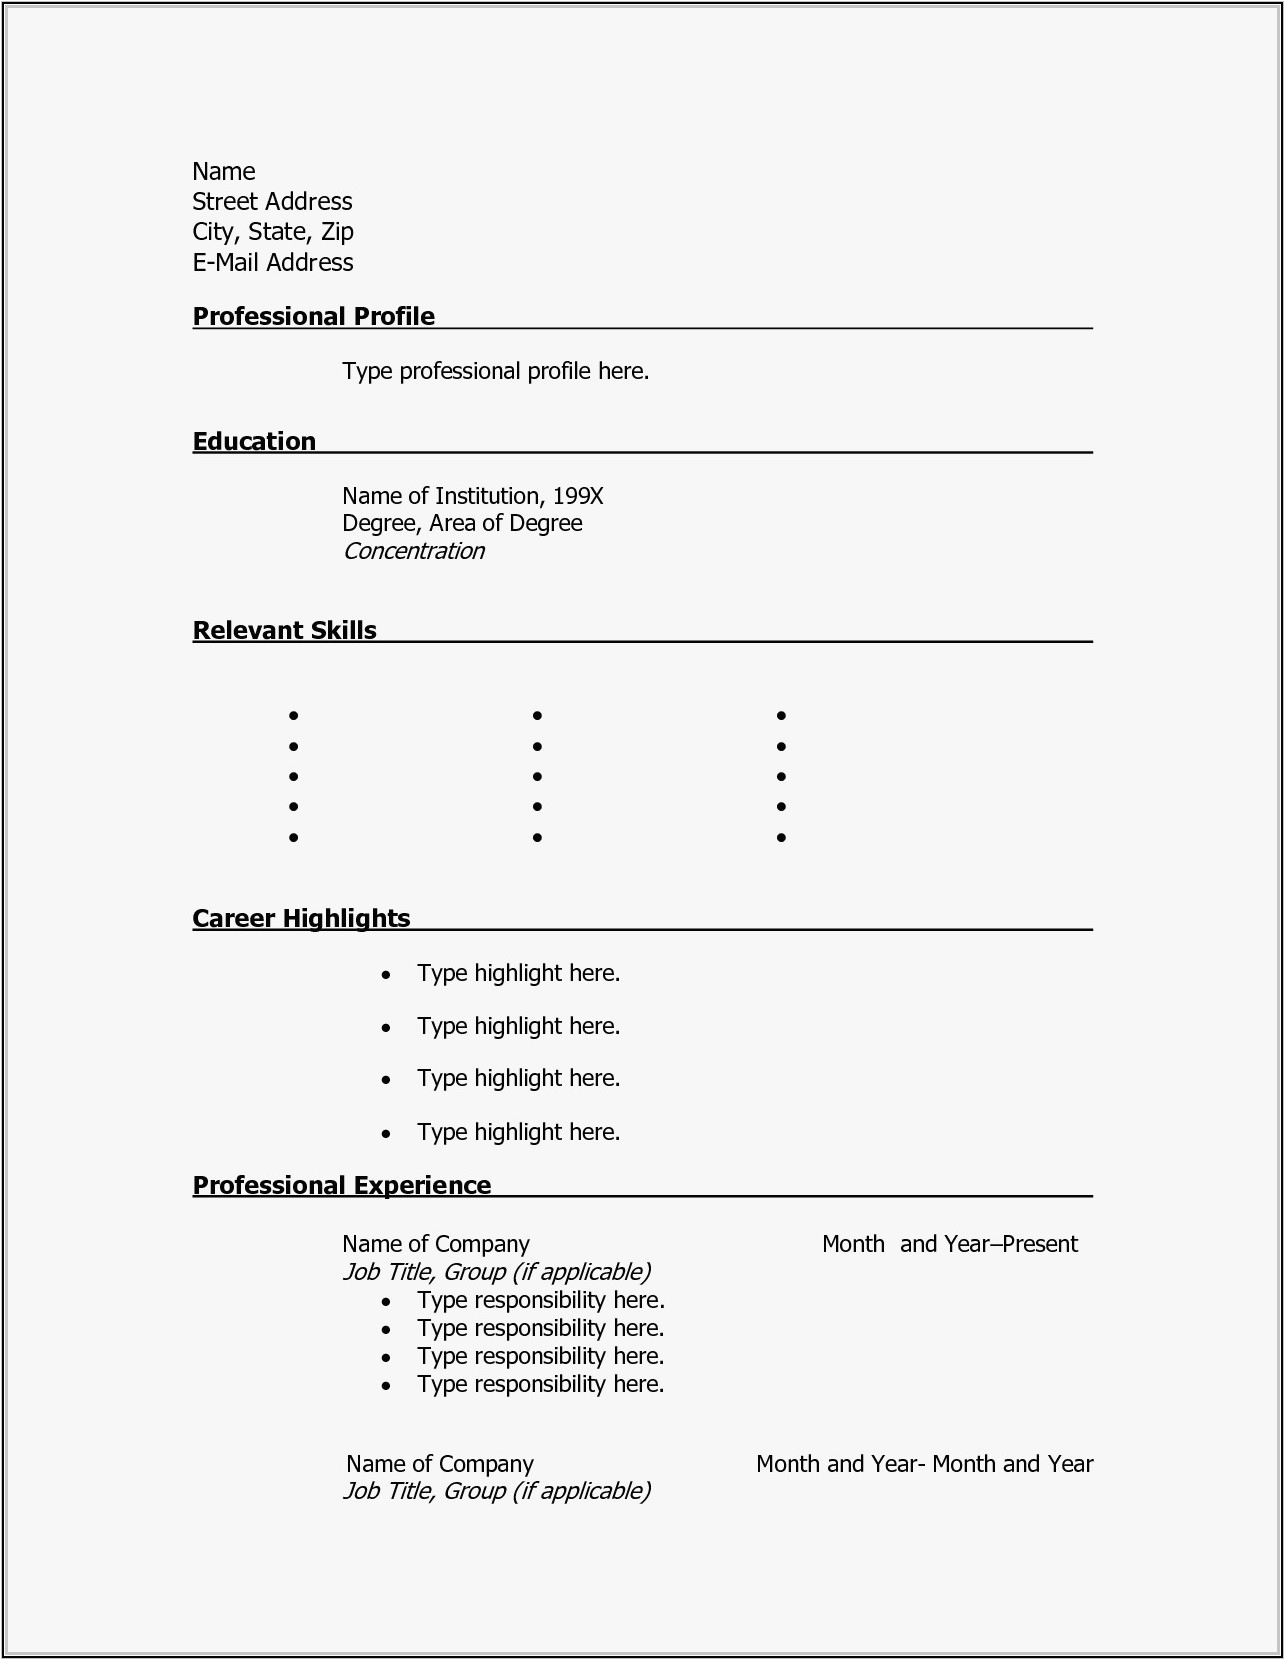 Resume Templates to Fill In the Blanks Blank Resume to Fill Out and Print